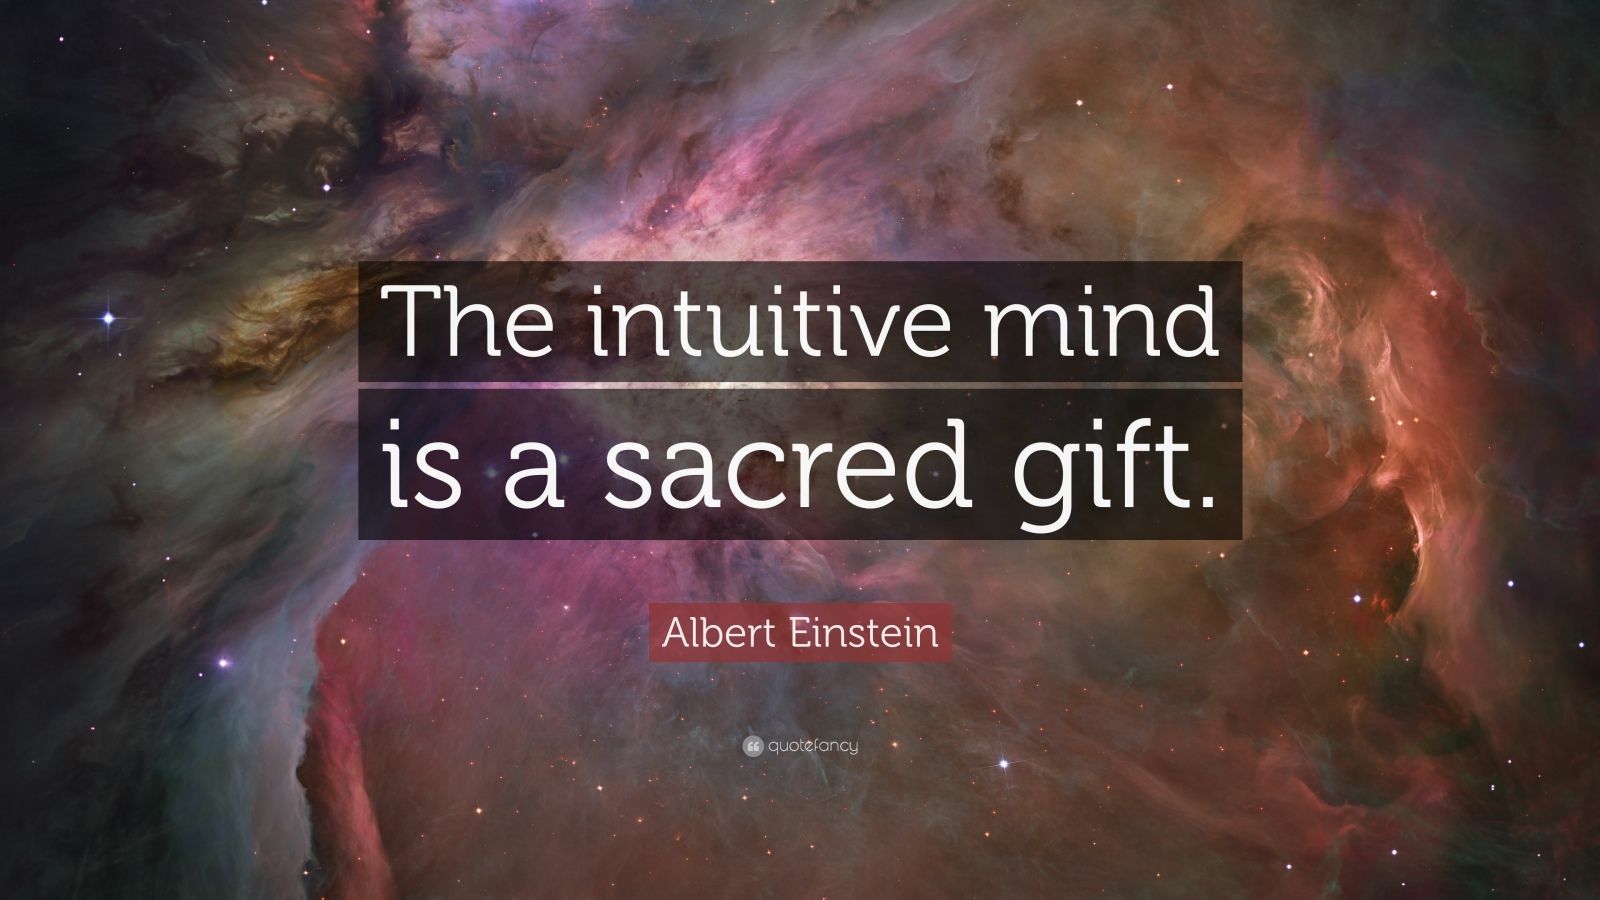 Albert Einstein Quote “The intuitive mind is a sacred gift.” (7